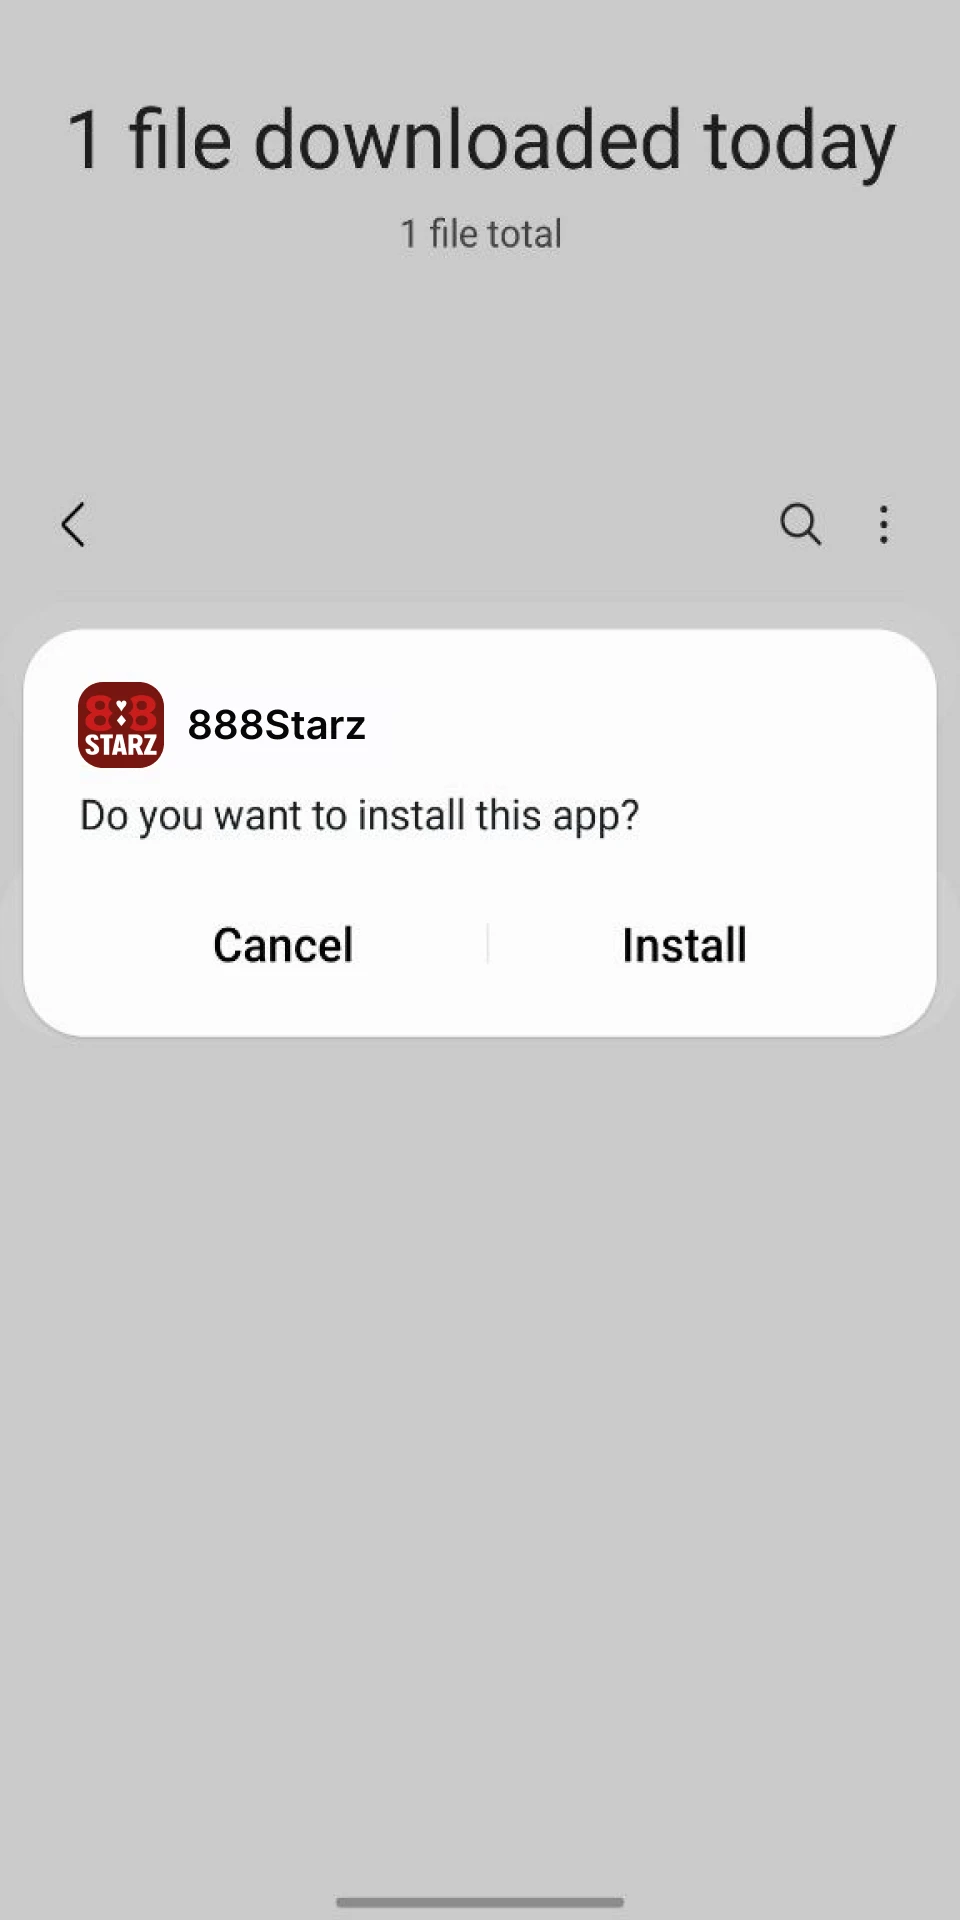 Install the 888Starz app on your Android device.